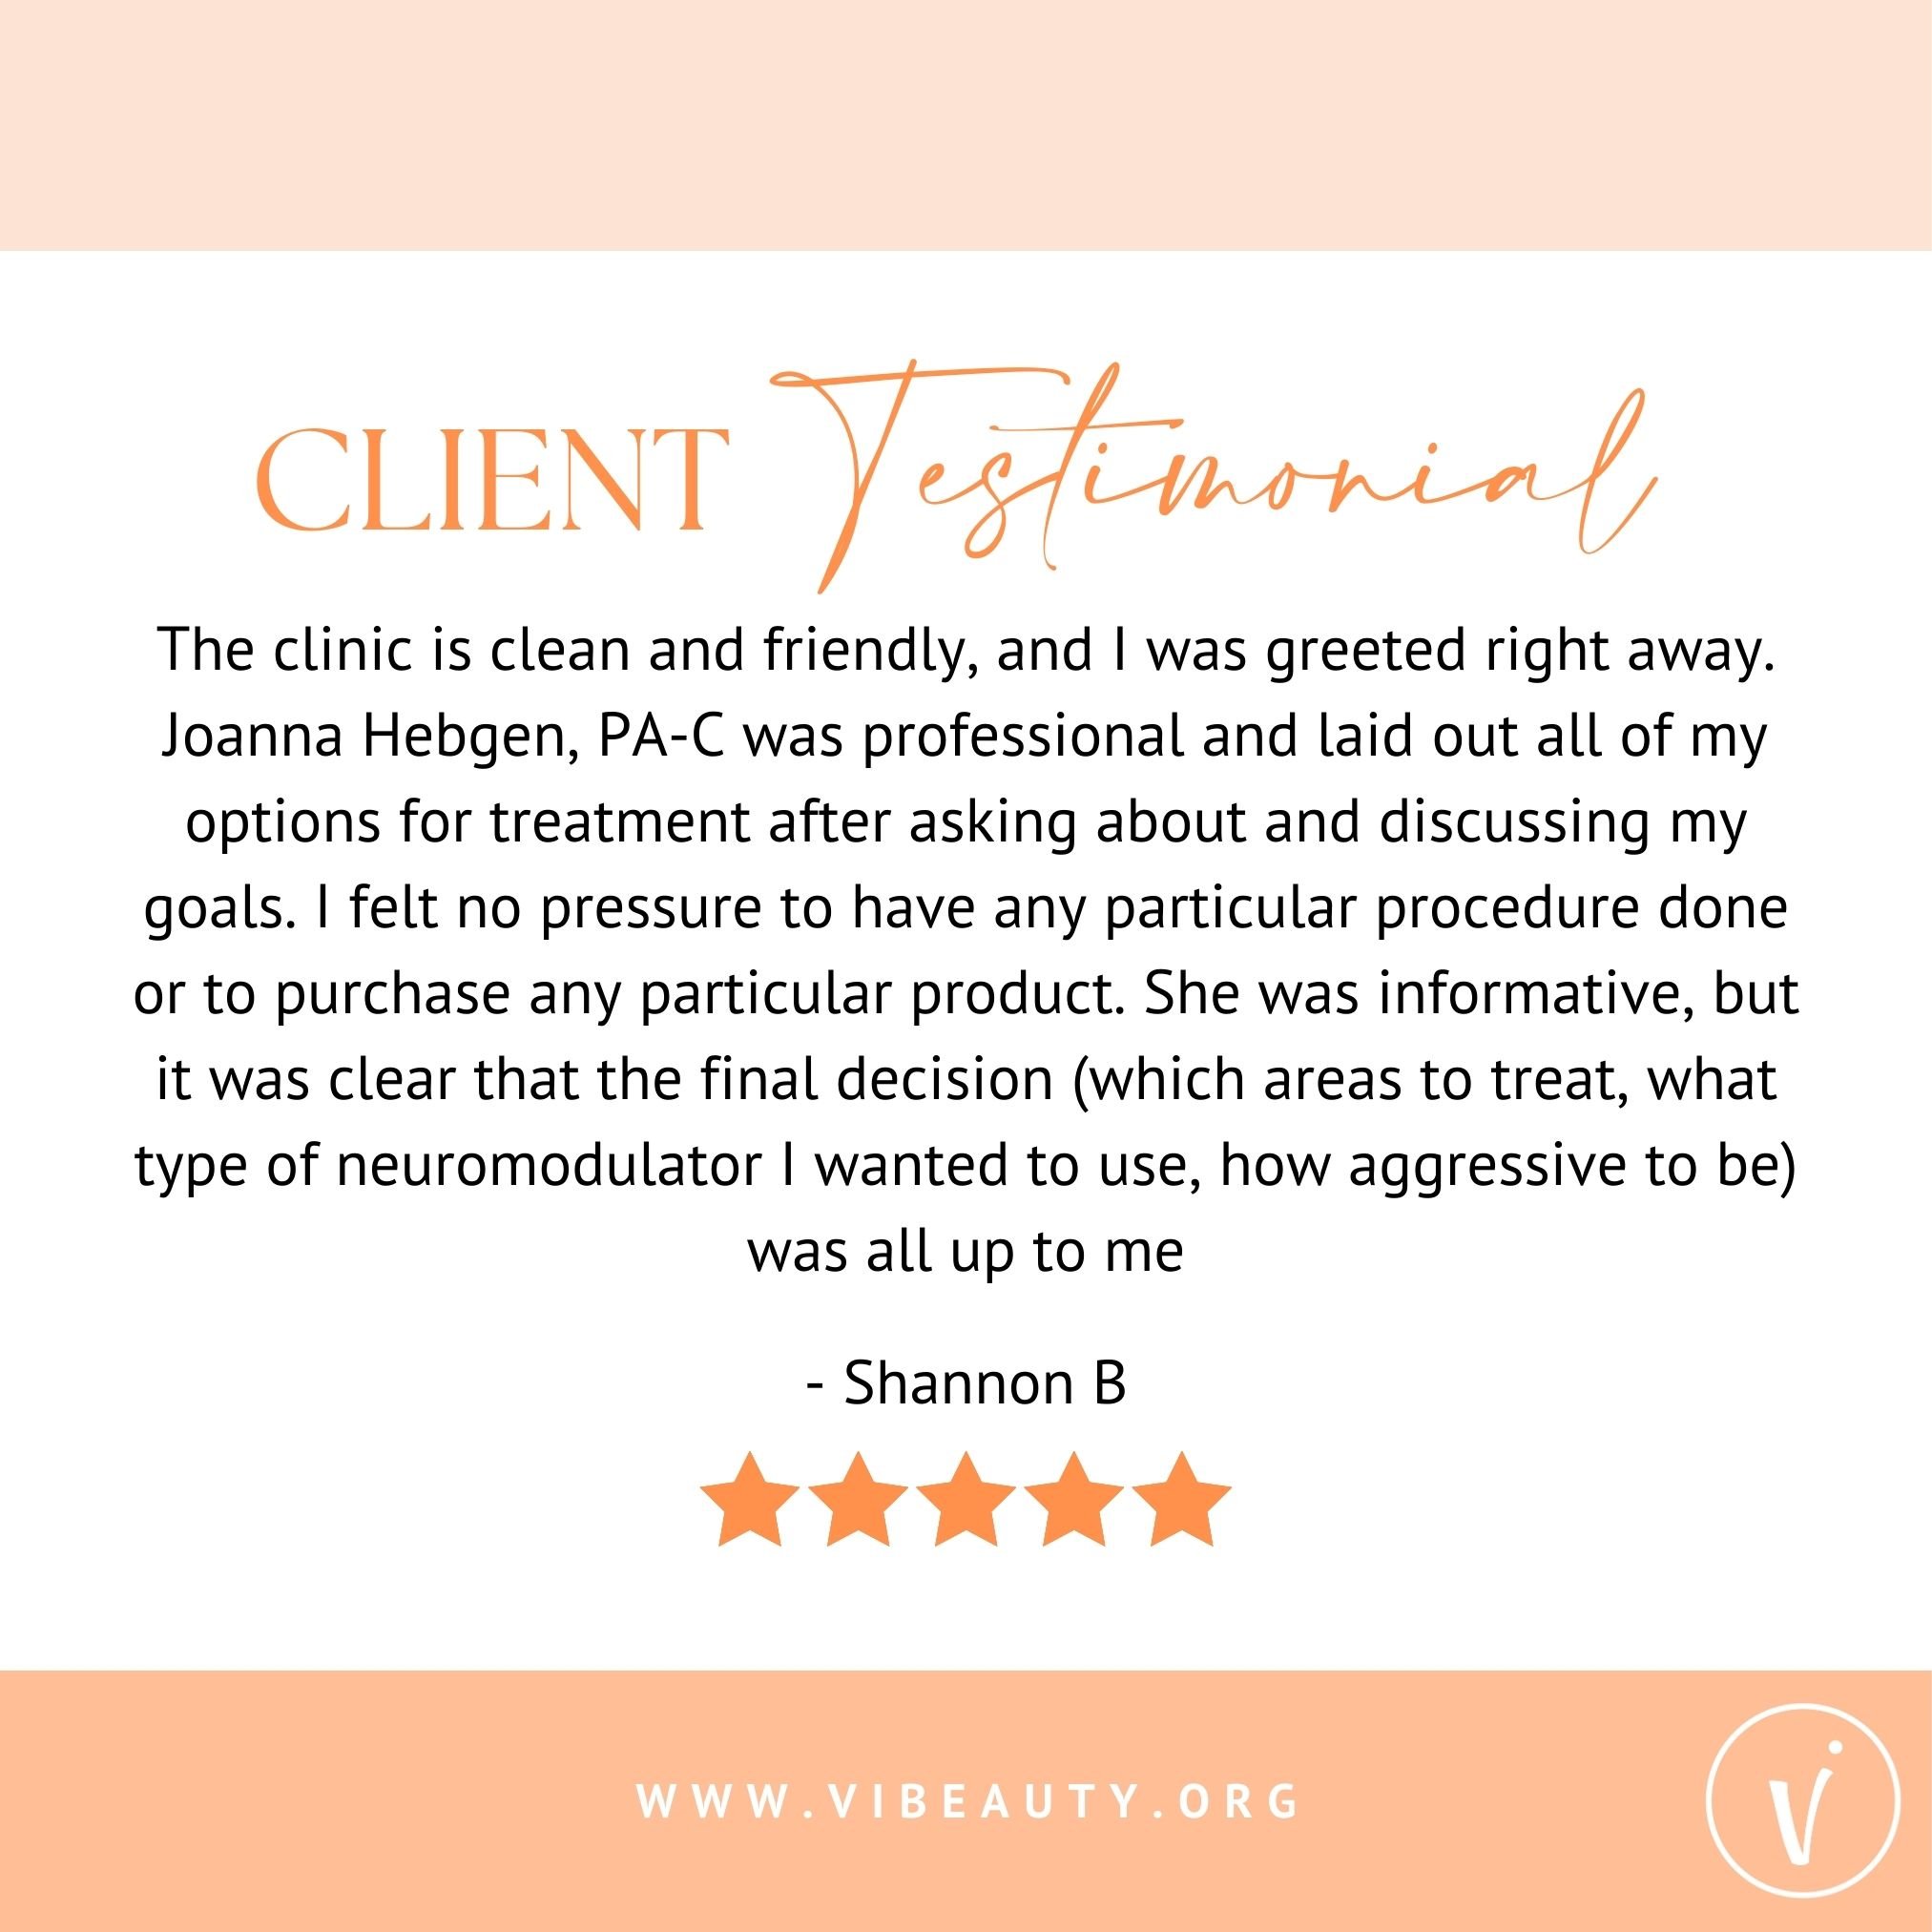 We absolutely love to hear this! Thank you so much for sharing, Shannon!🧡 #customerreview #toprated #fivestarreview #FiveStarExperience #clienttestimony